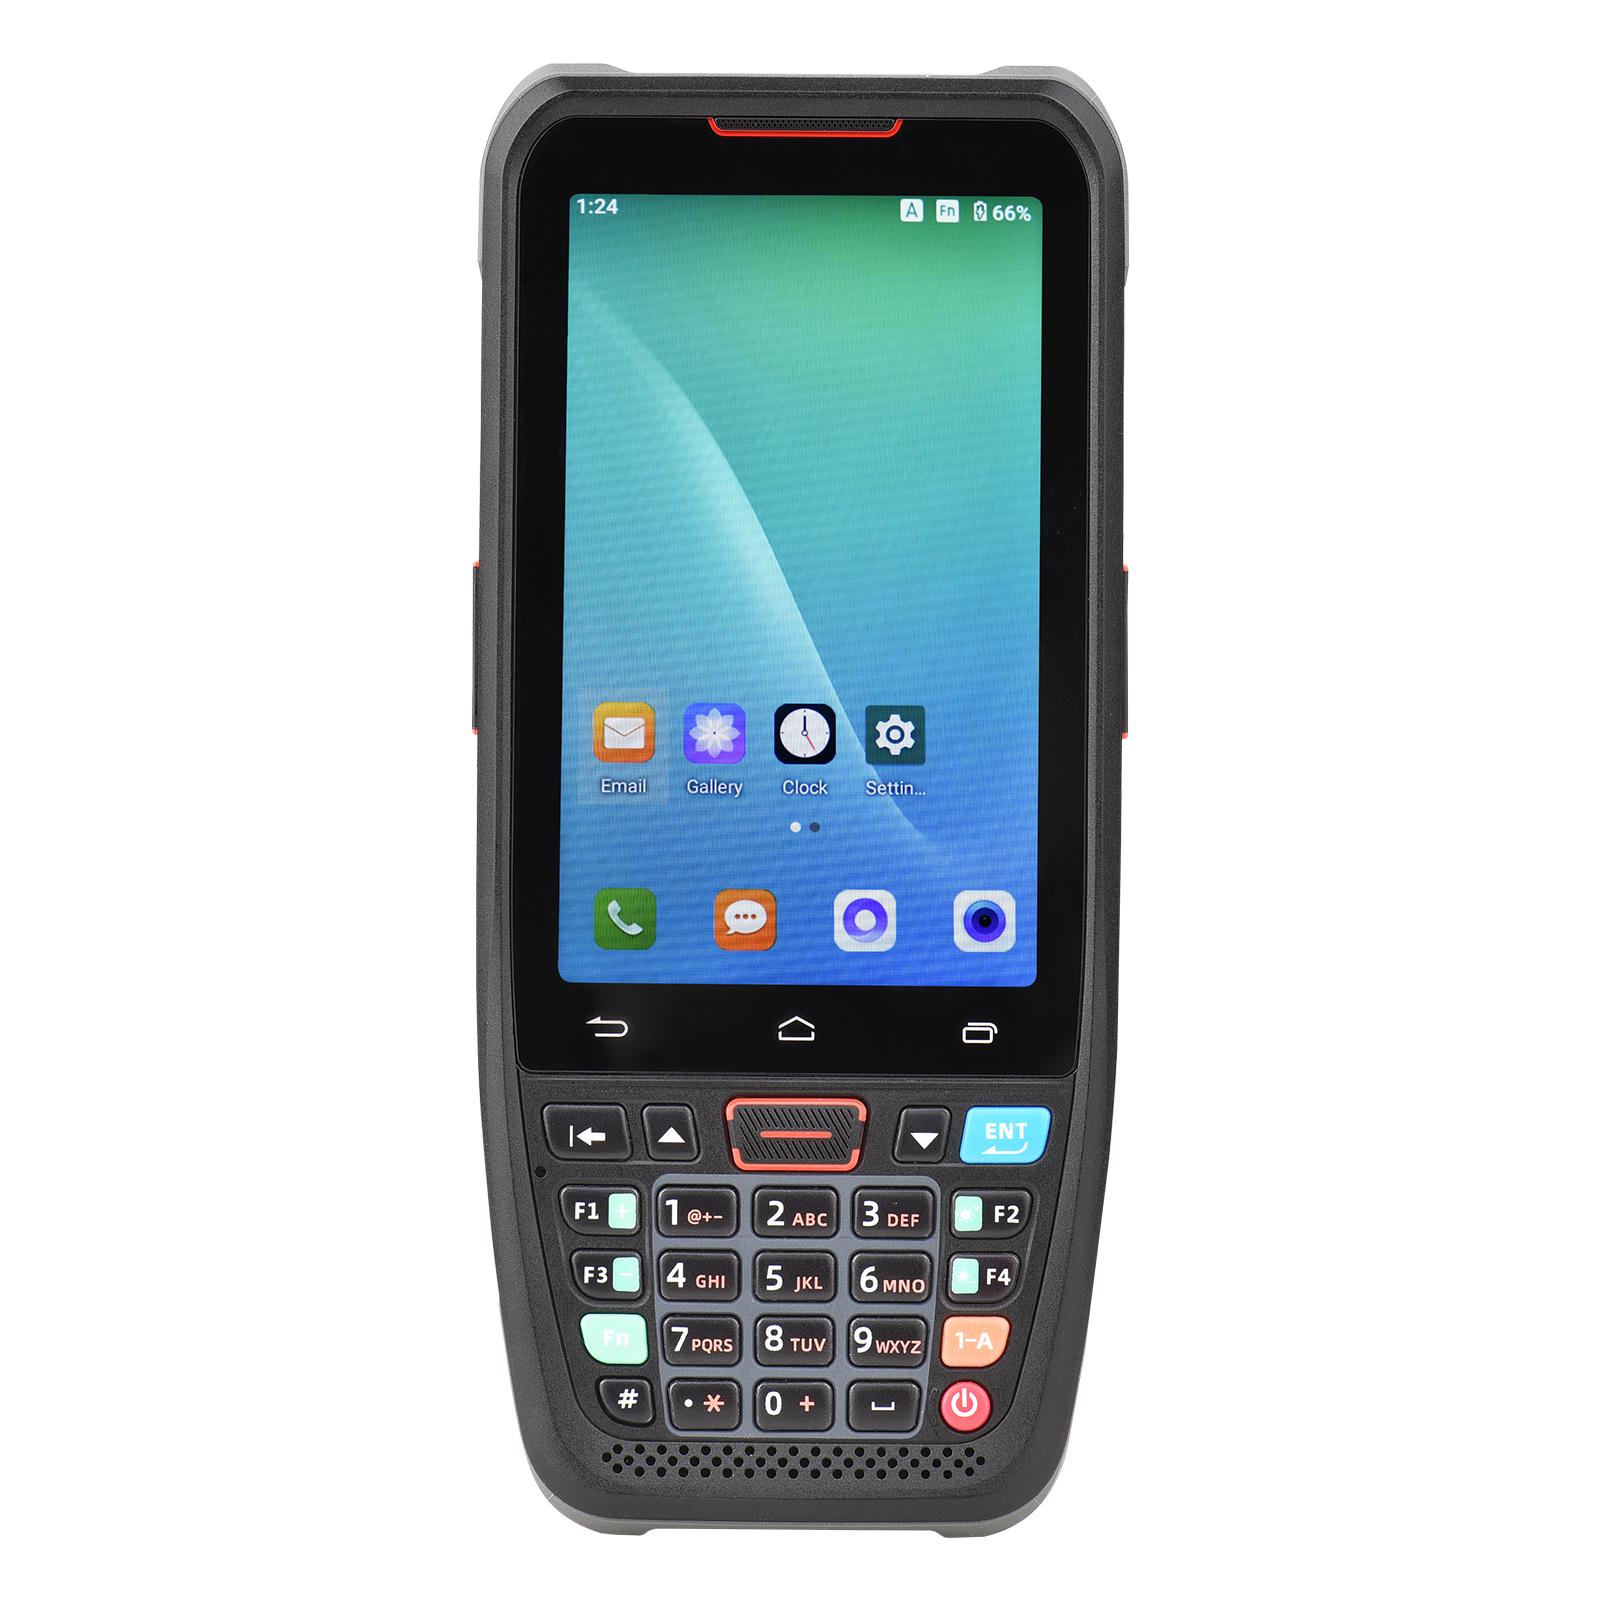 

Scanners Handheld POS Android 10.0 PDA Terminal 1D/2D/QR Barcode Scanner Support 2/3/4G WiFi BT with 4.0 Inch Touchscreen For Supermarket